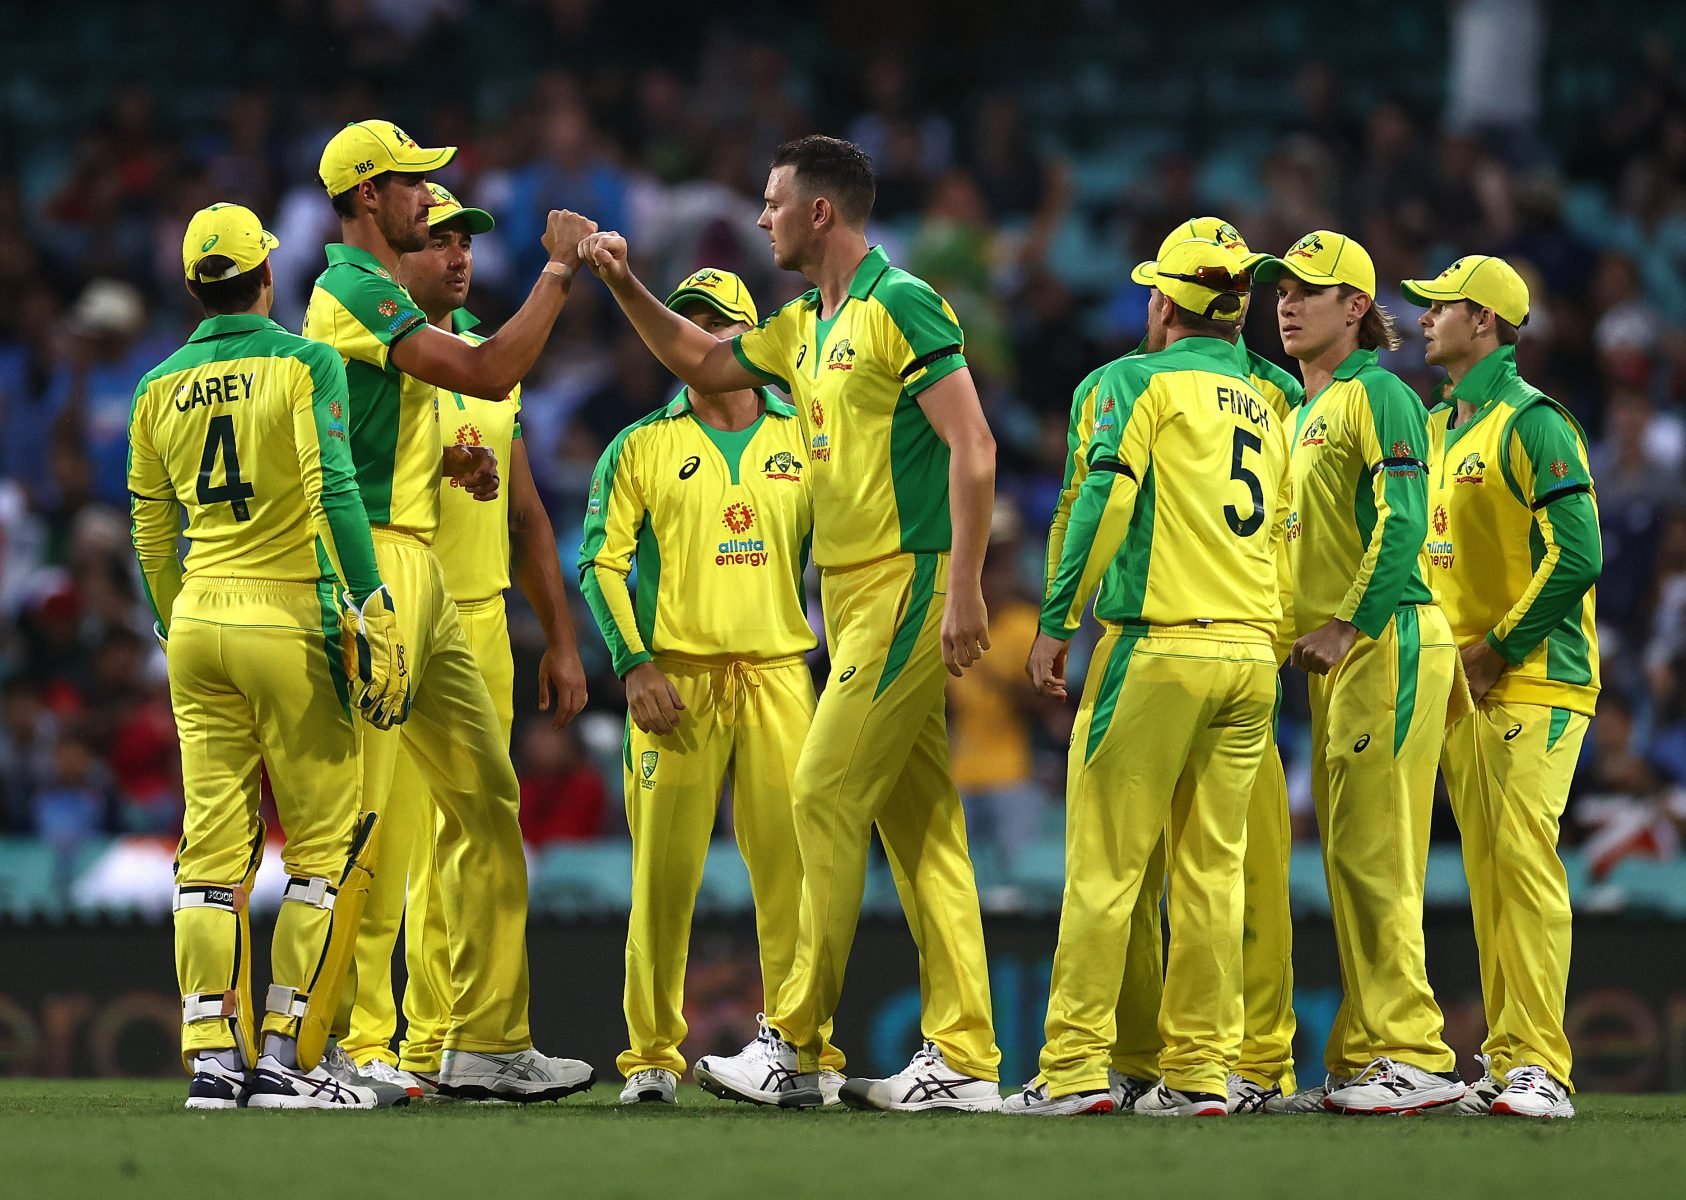 Australia has shown outstanding performance in the first ODI: Vaughan